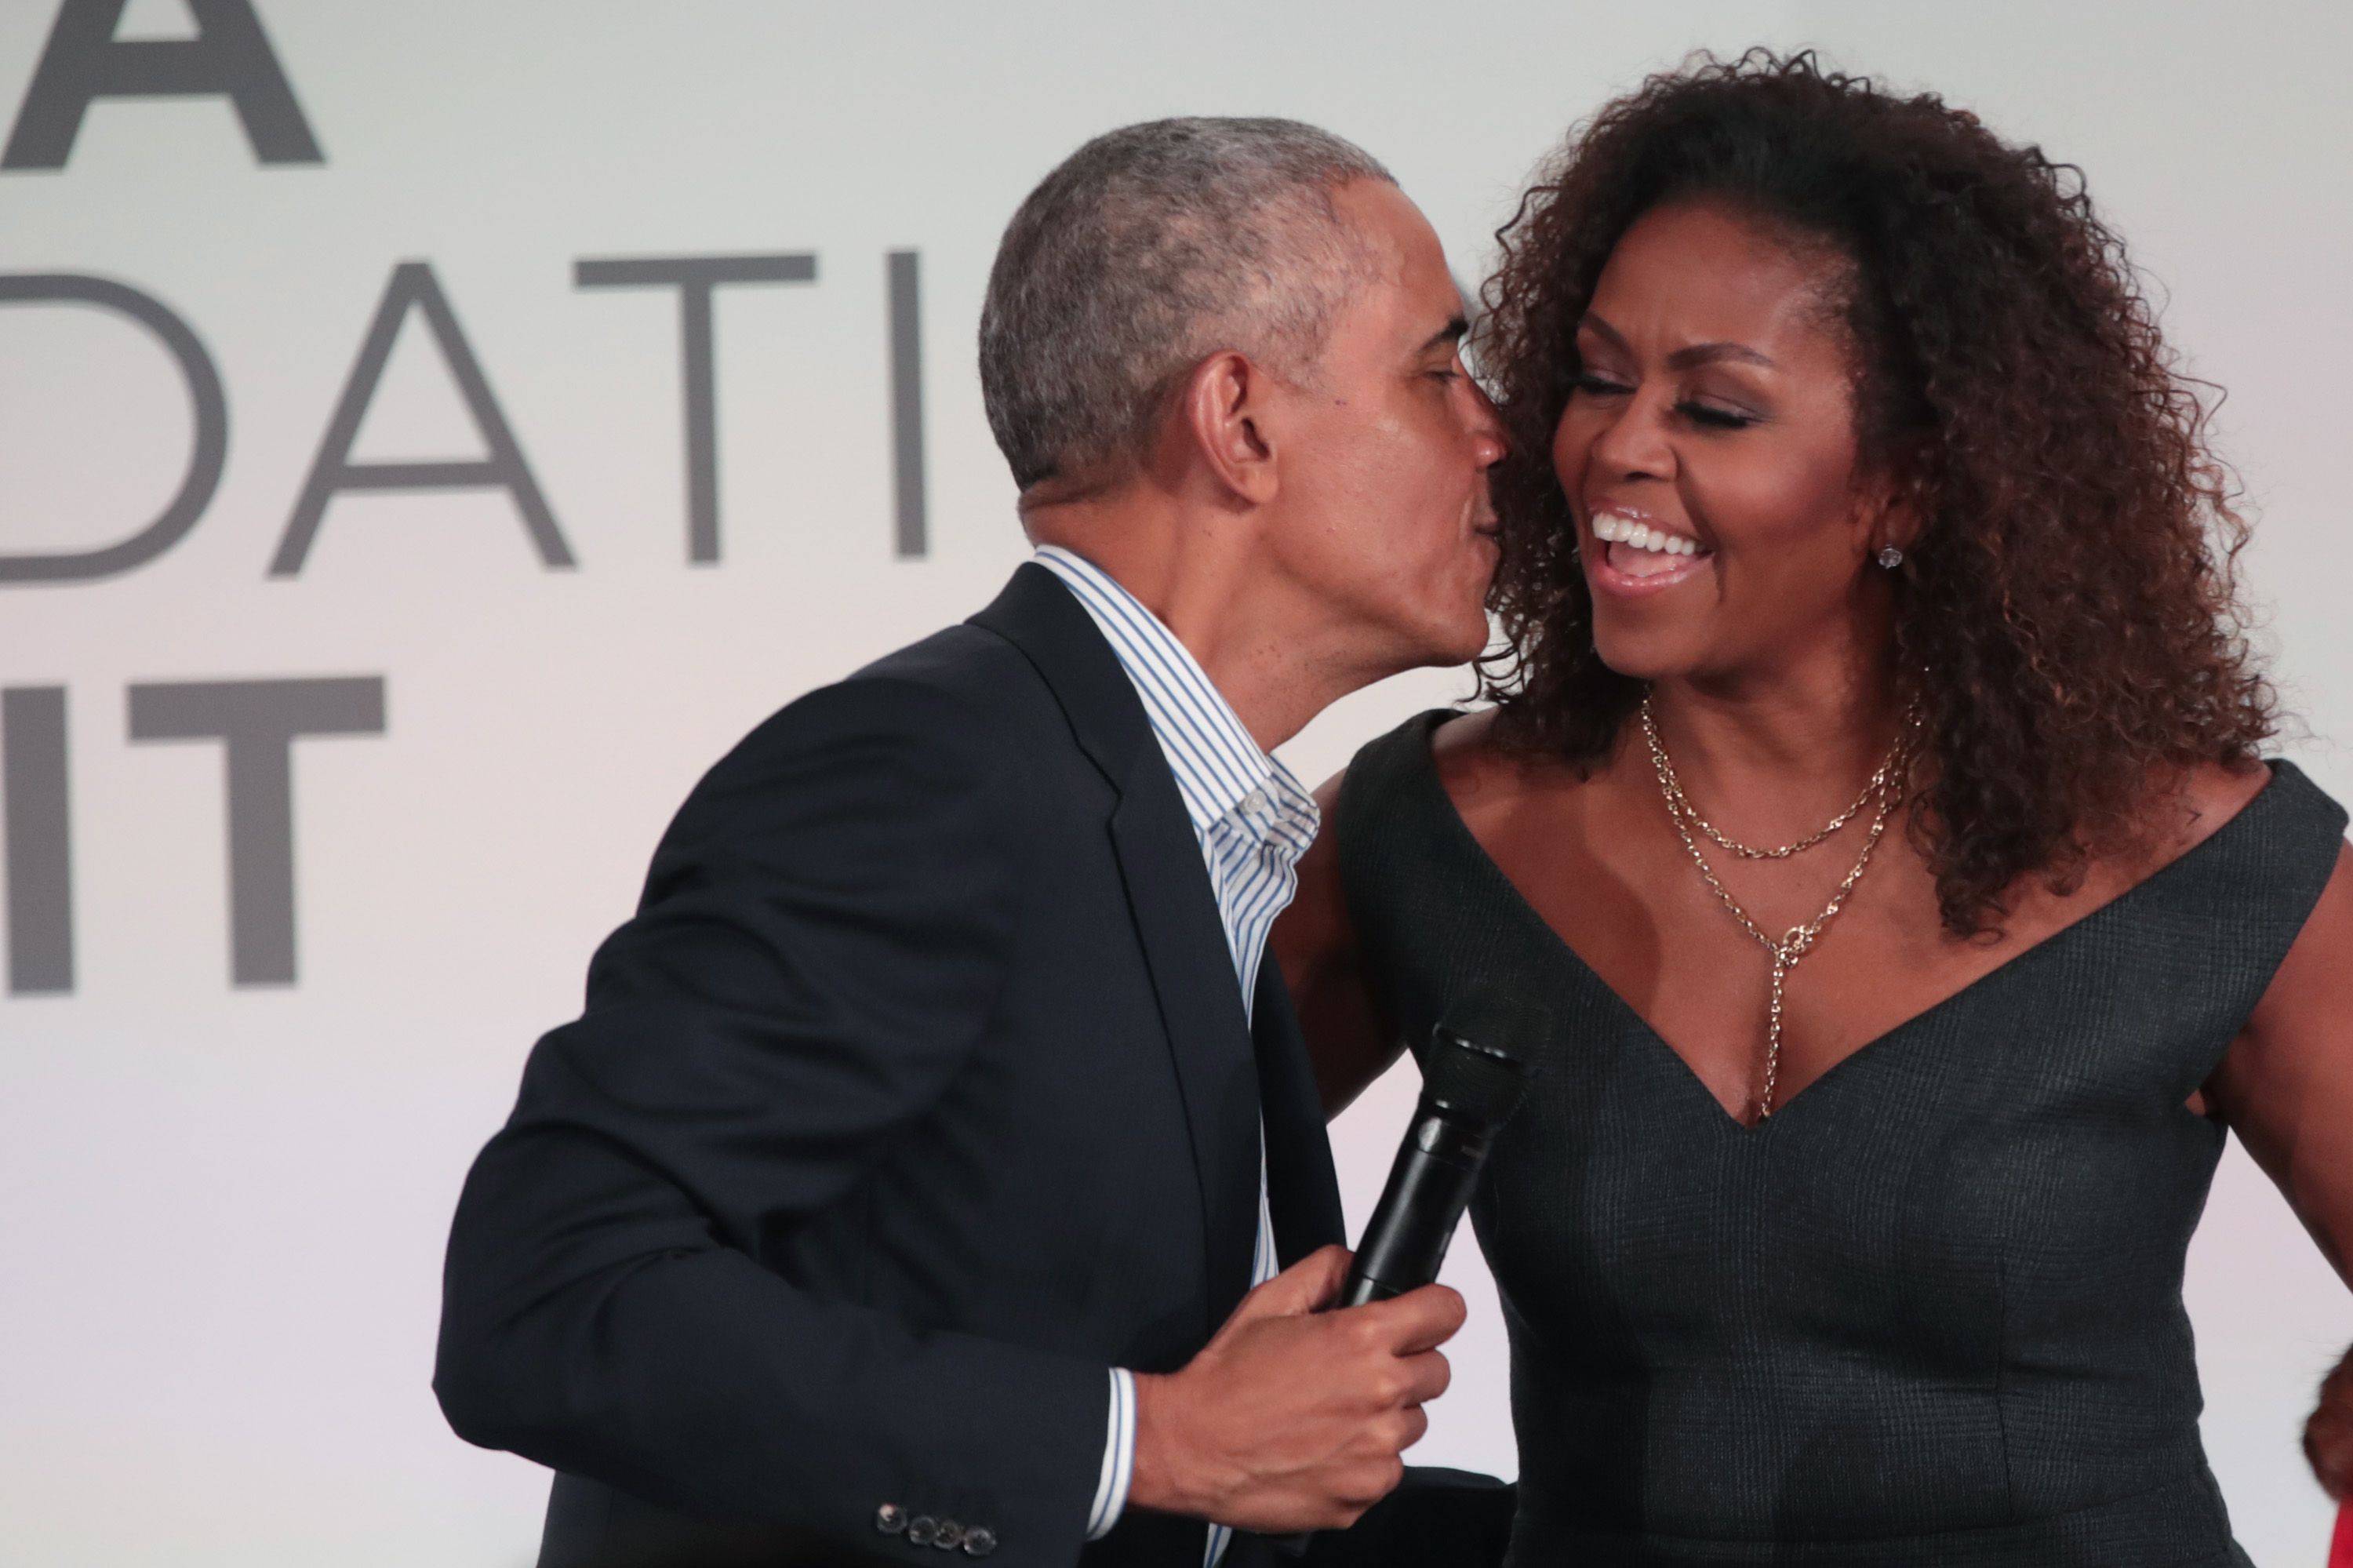 Barack Obama gives his wife Michelle a kiss as they close the Obama Foundation Summit together on the campus of the Illinois Institute of Technology on October 29, 2019 in Chicago, Illinois. | Photo: Getty Images